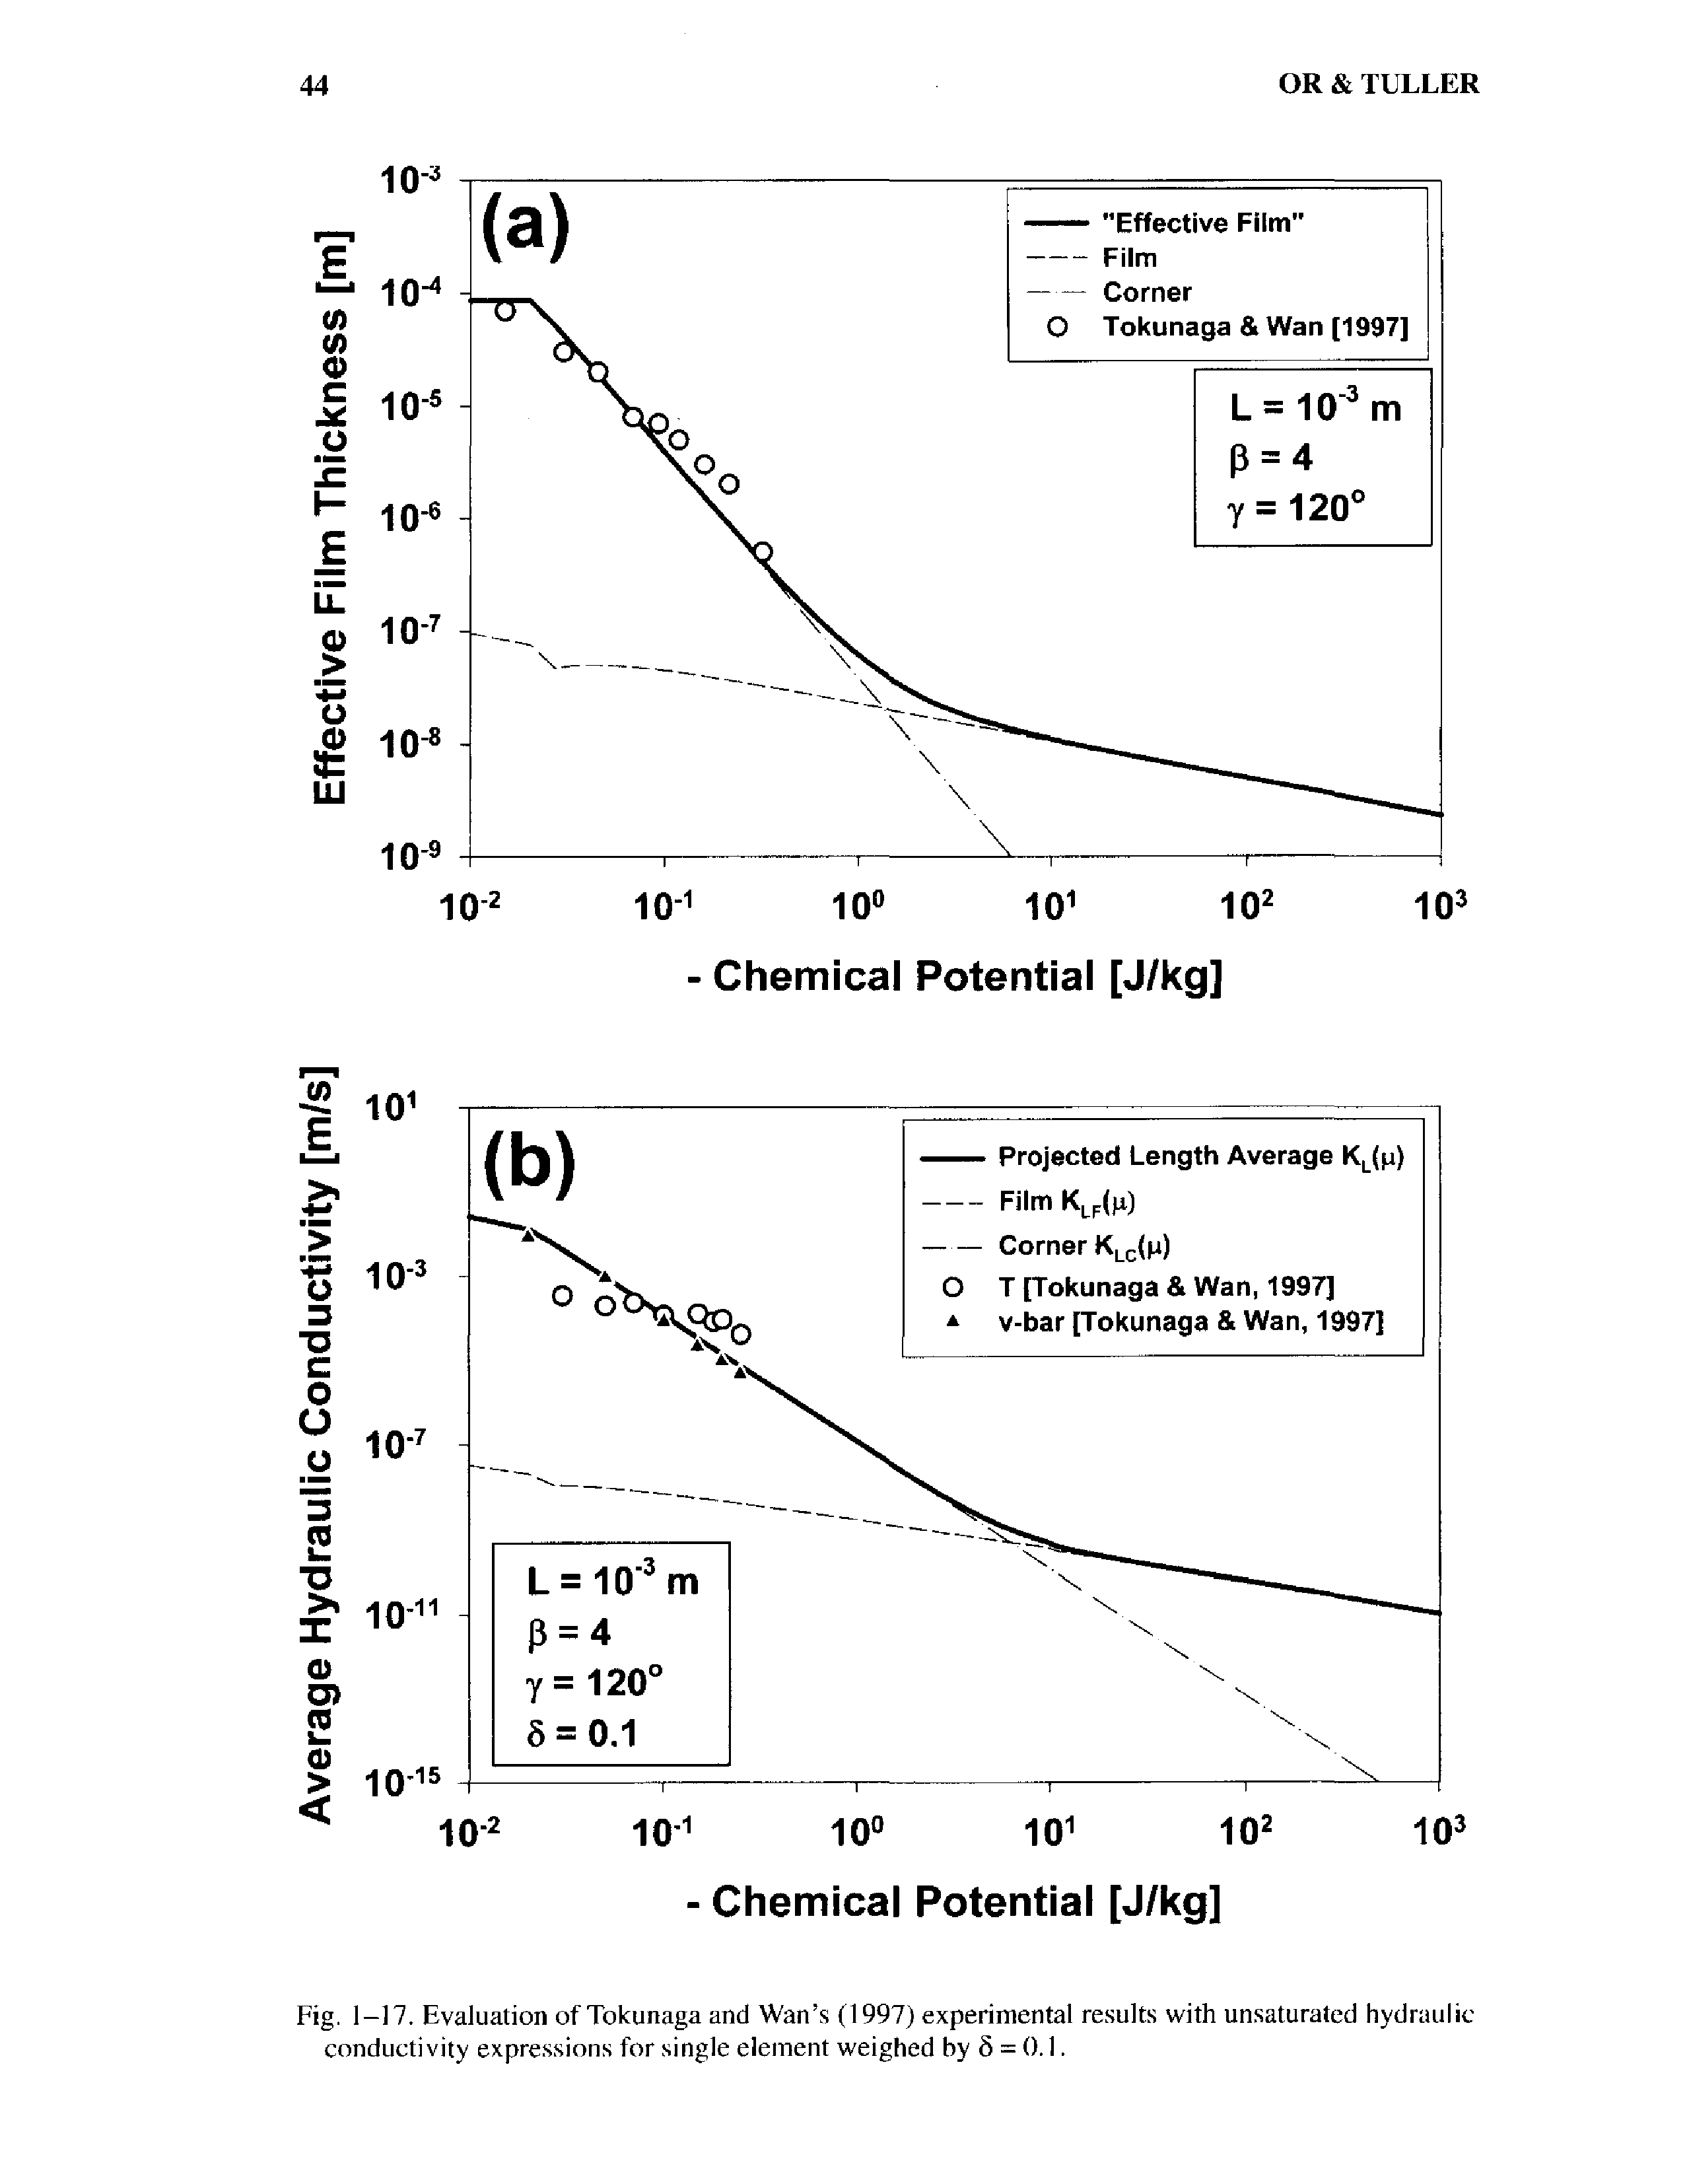 Fig. 1-17. Evaluation of Tokunaga and Wan s (1997) experimental results with unsaturated hydraulic conductivity expressions for single element weighed by 5 = 0.1.